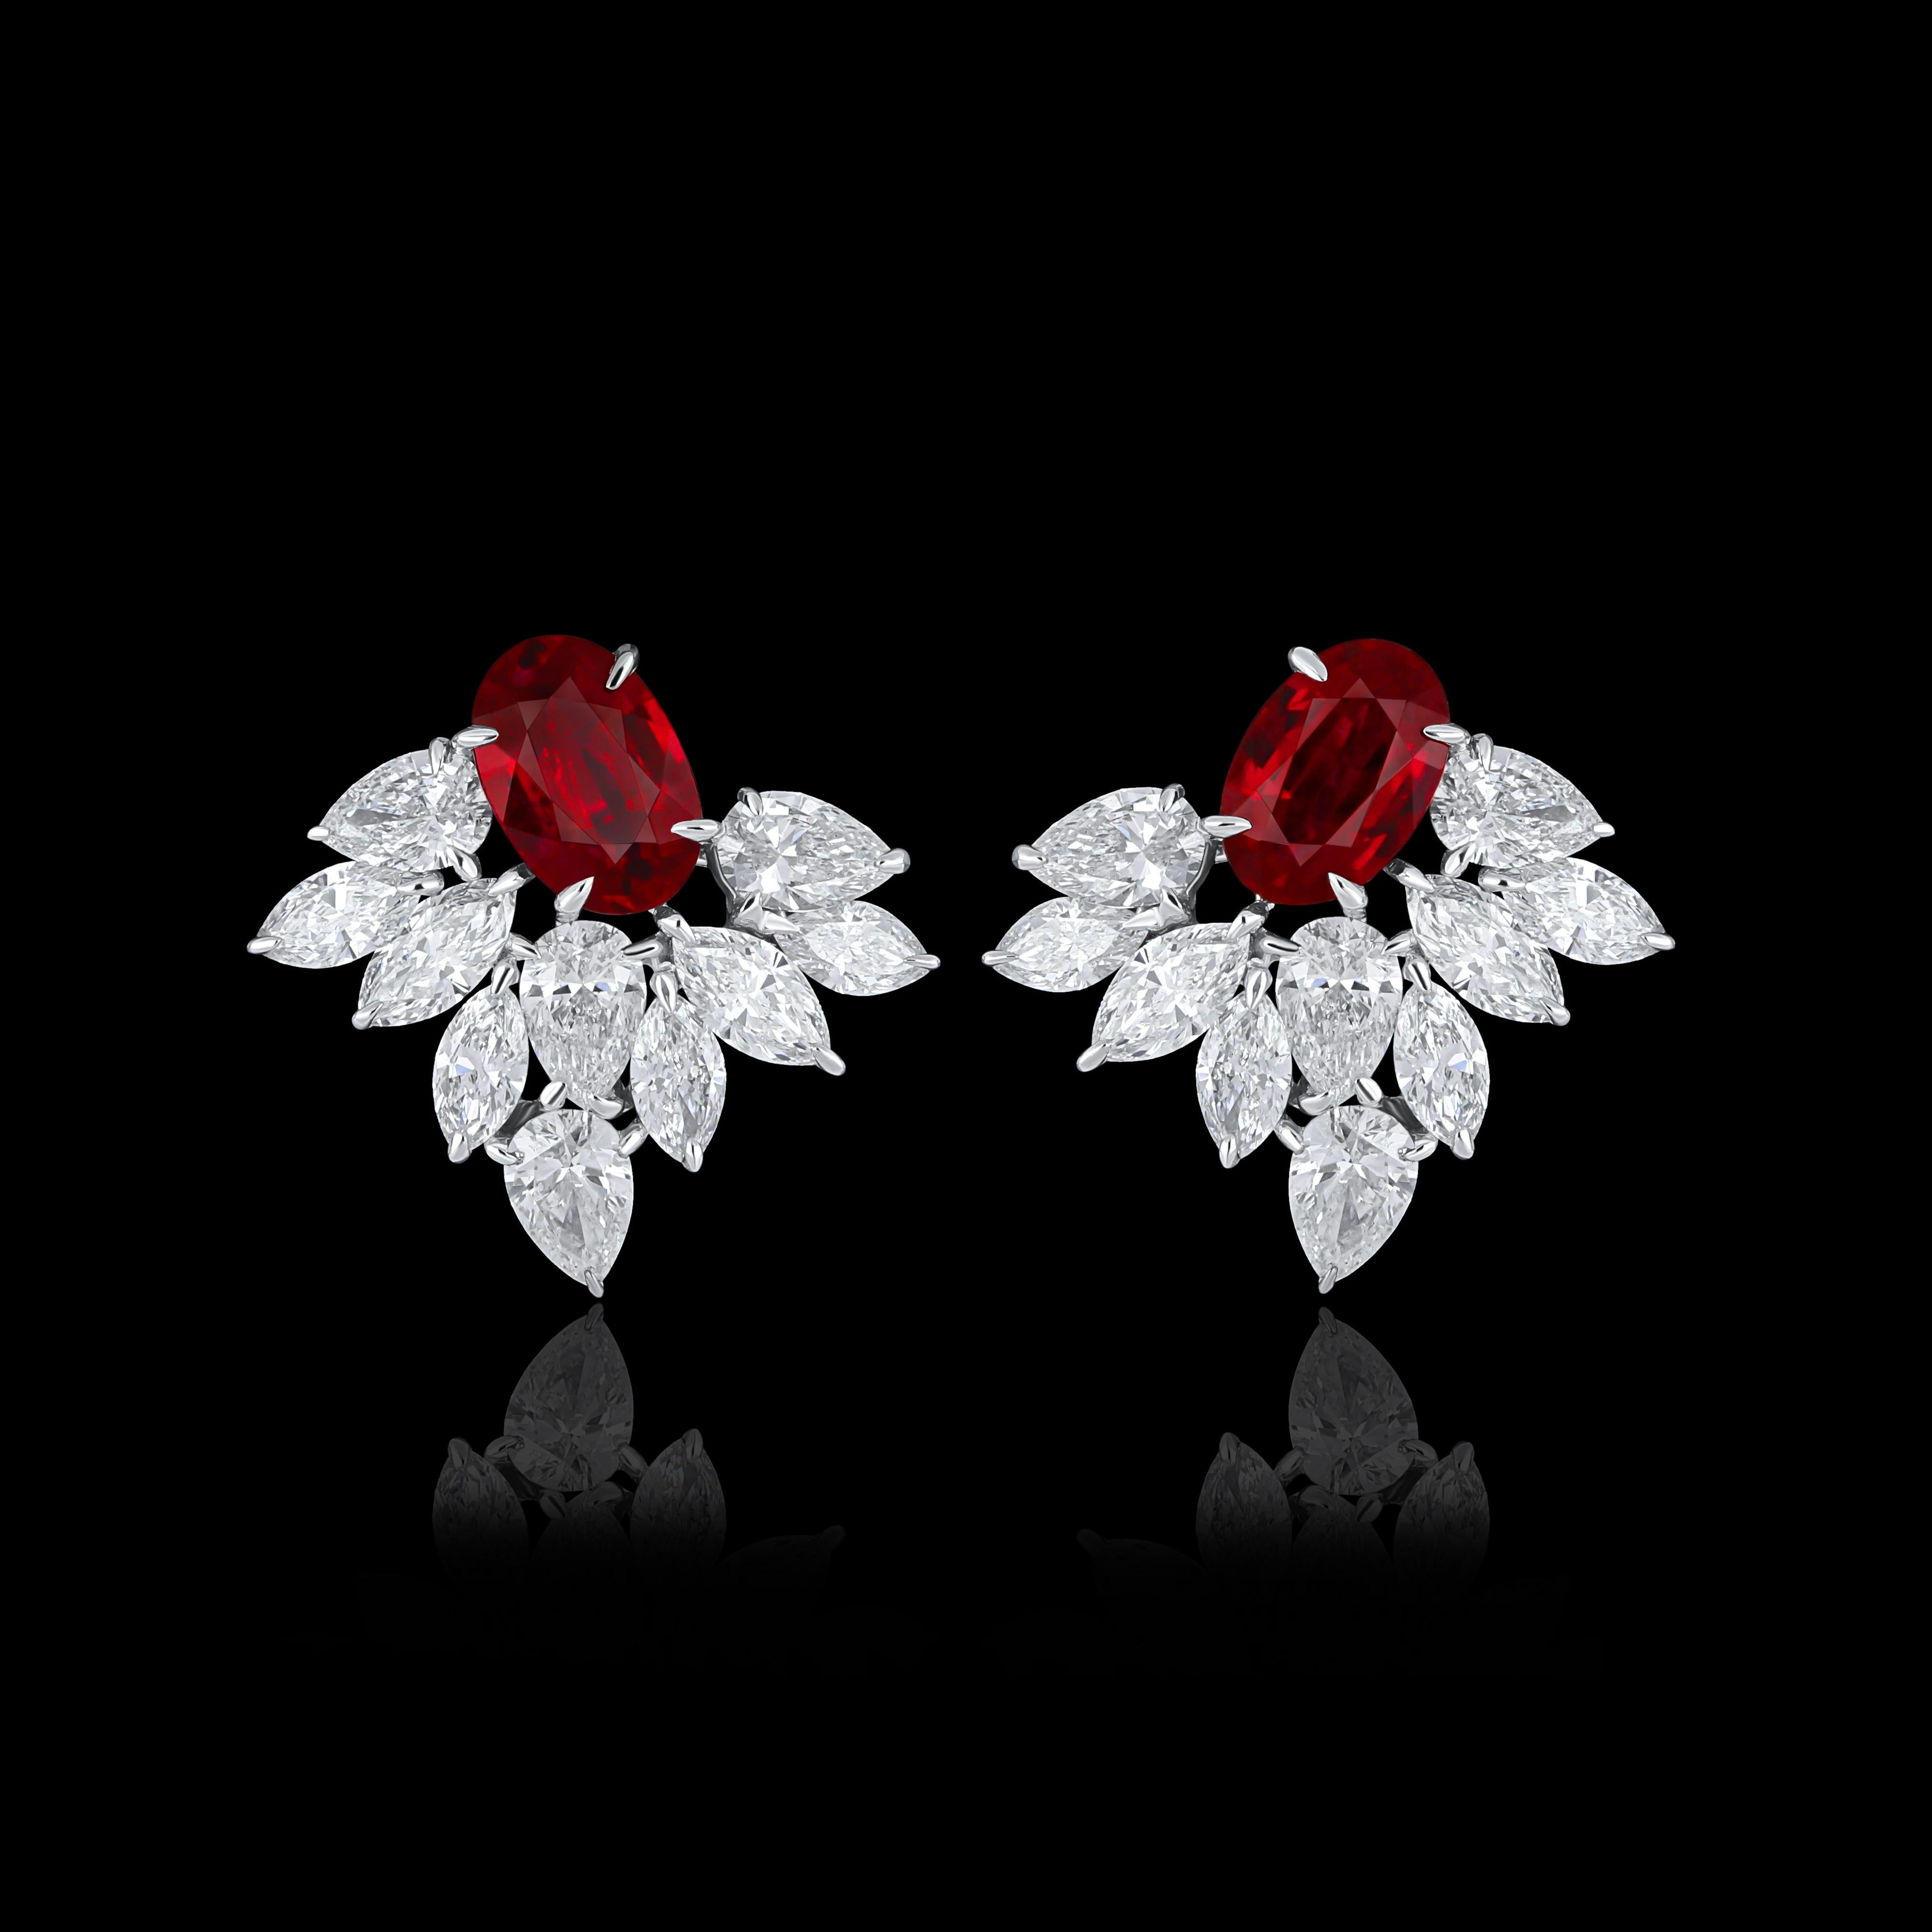 Elegant and exquisitely detailed 18 Karat White Gold Earring, center set with 0.97Cts .Oval Shape Ruby and micro pave set Diamonds, weighing approx. 1.49Cts Beautifully Hand crafted in 18 Karat White Gold.

Stone Detail:
Ruby GR: 6X4MM

Stone